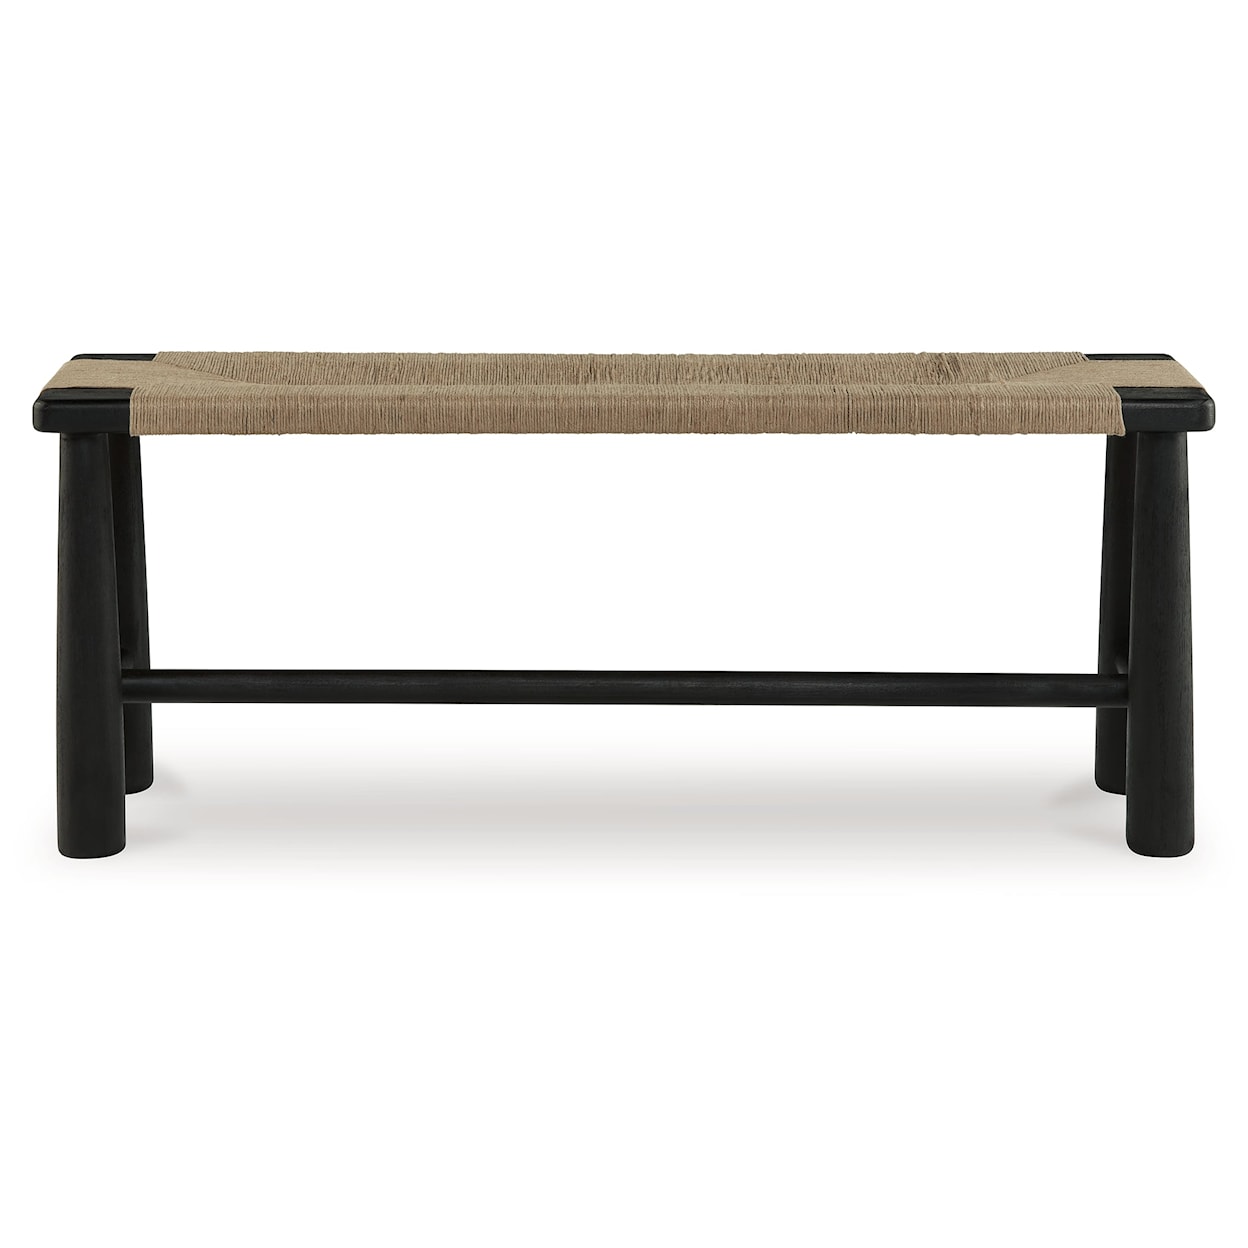 Signature Design by Ashley Acerman Accent Bench